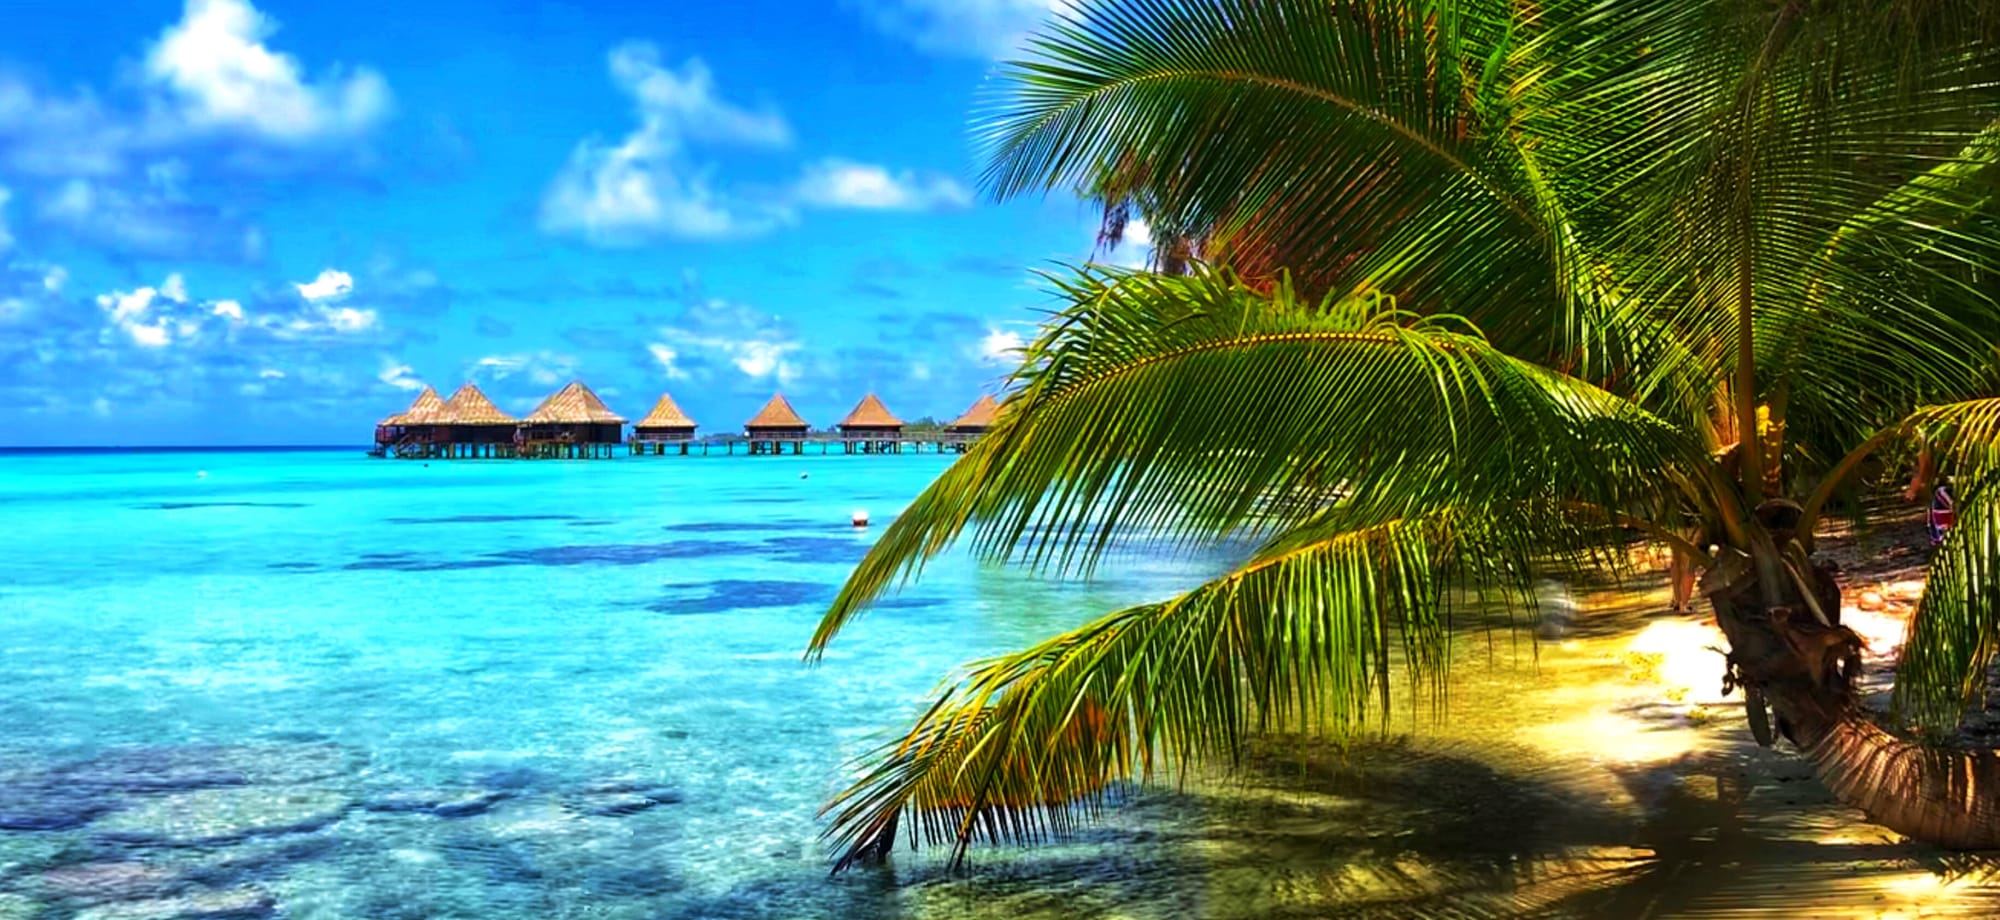 A beautiful view from far bungalows on Rangiroa atoll, French Polynesia, in the shade of a palm trees forest.